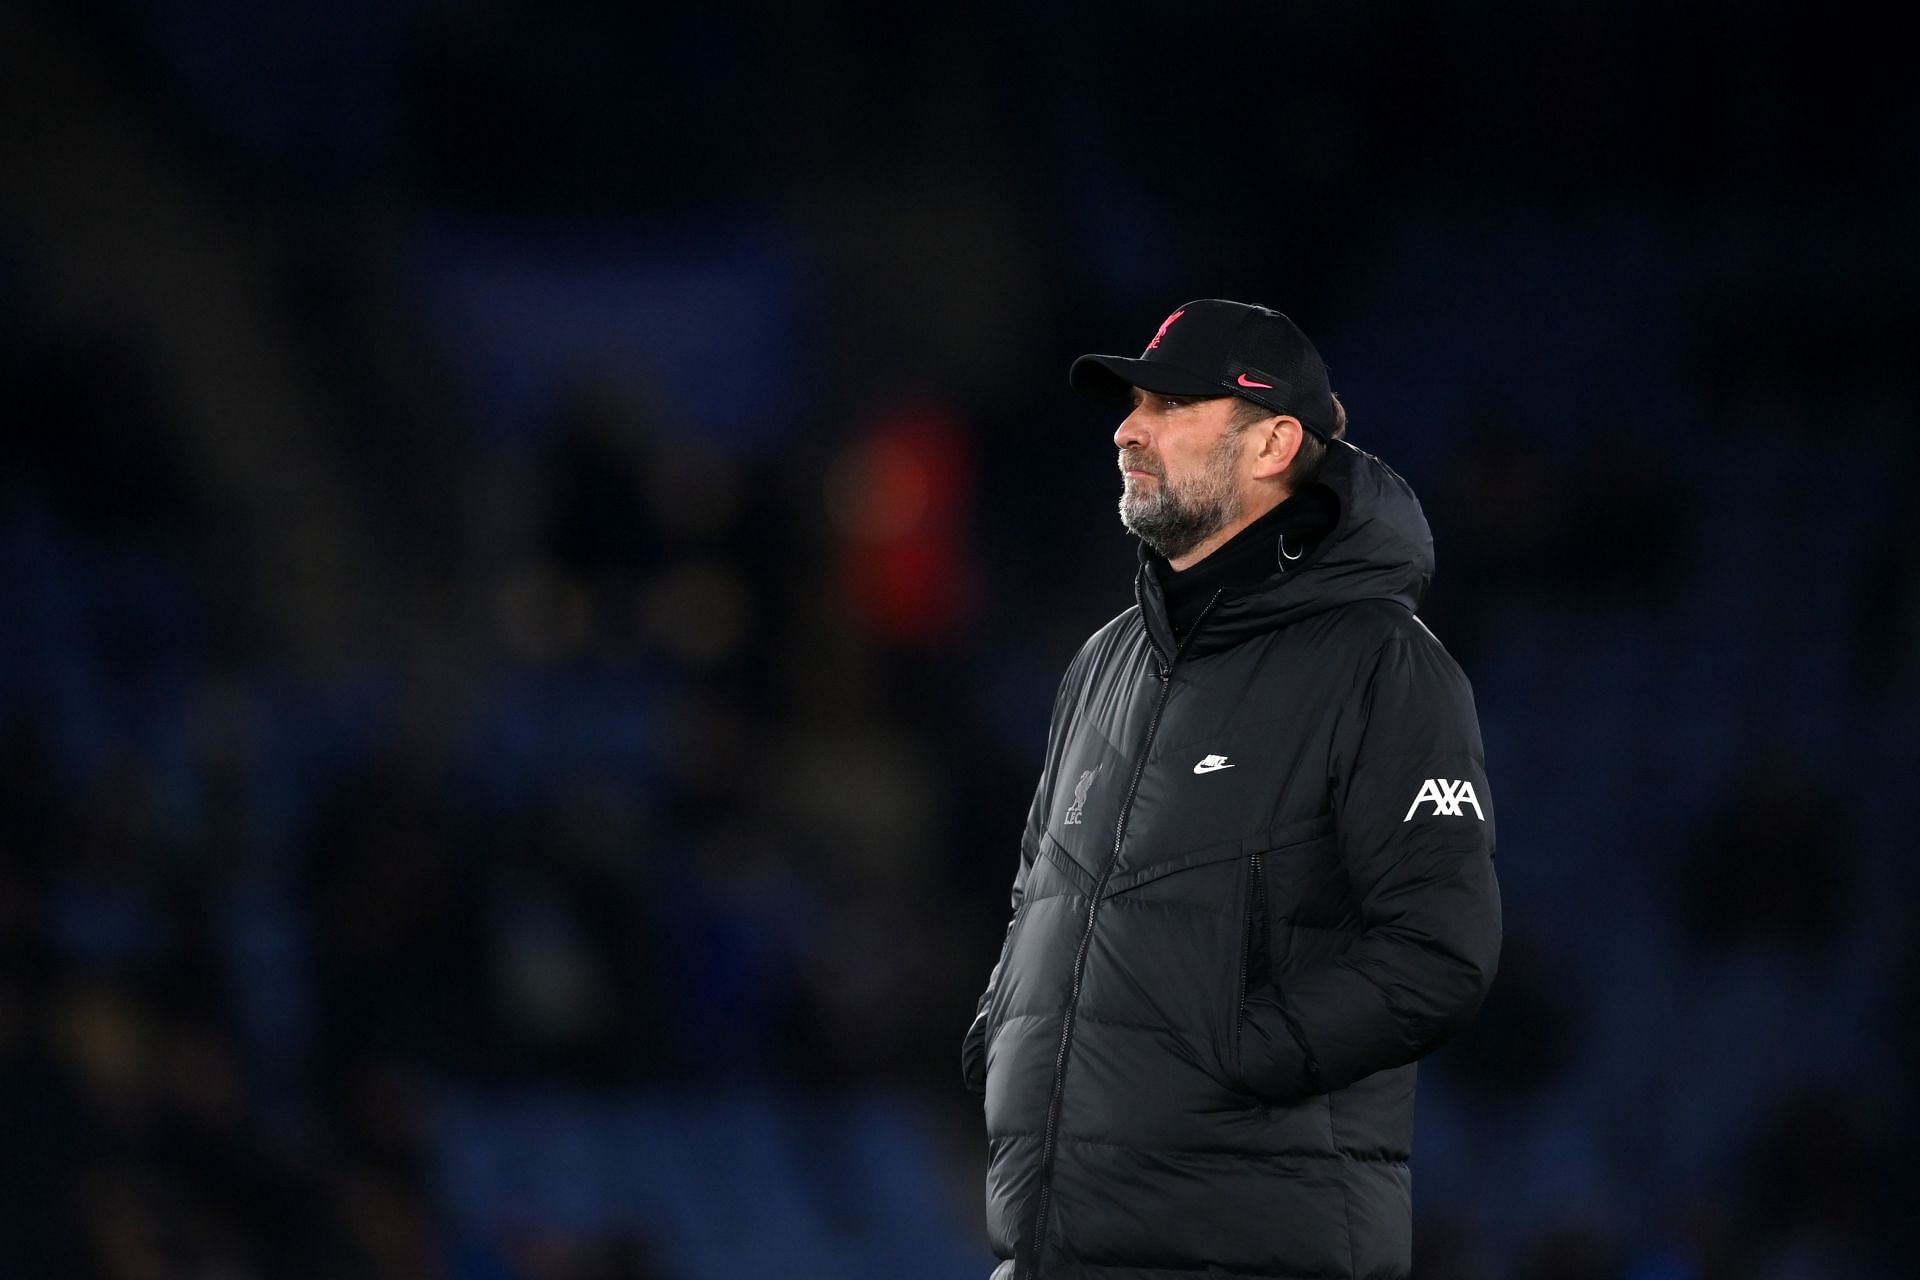 Jurgen Klopp was one of several notable absentees for Liverpool in this game.